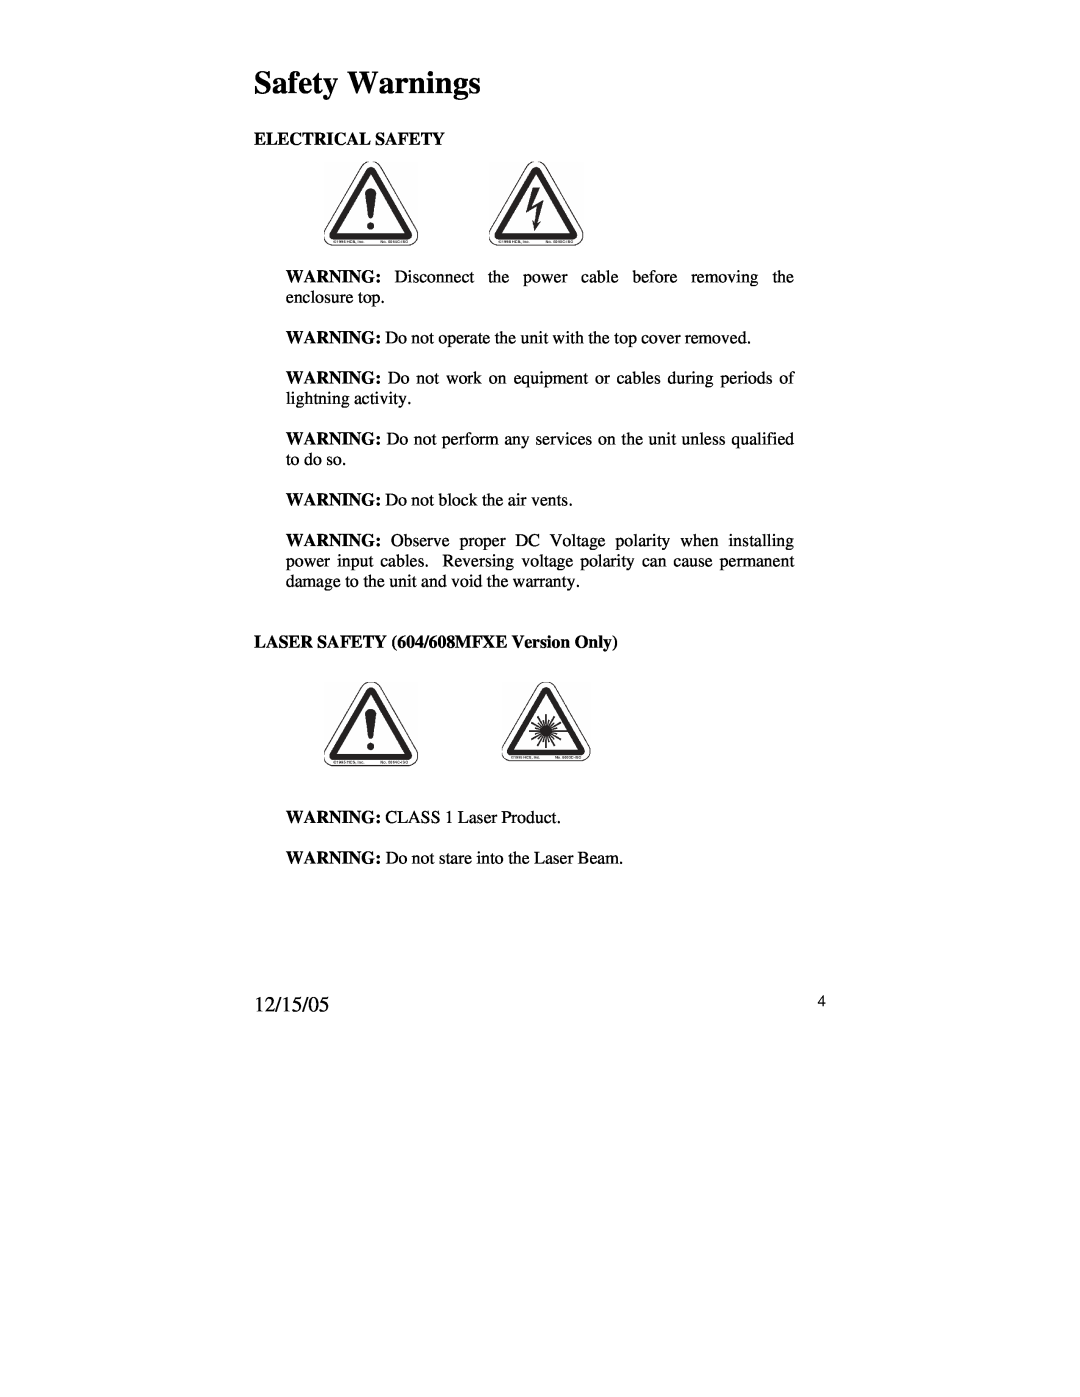 N-Tron 604MFXE-ST-40, 608MFX-ST manual Electrical Safety, LASER SAFETY 604/608MFXE Version Only, Safety Warnings, 12/15/05 